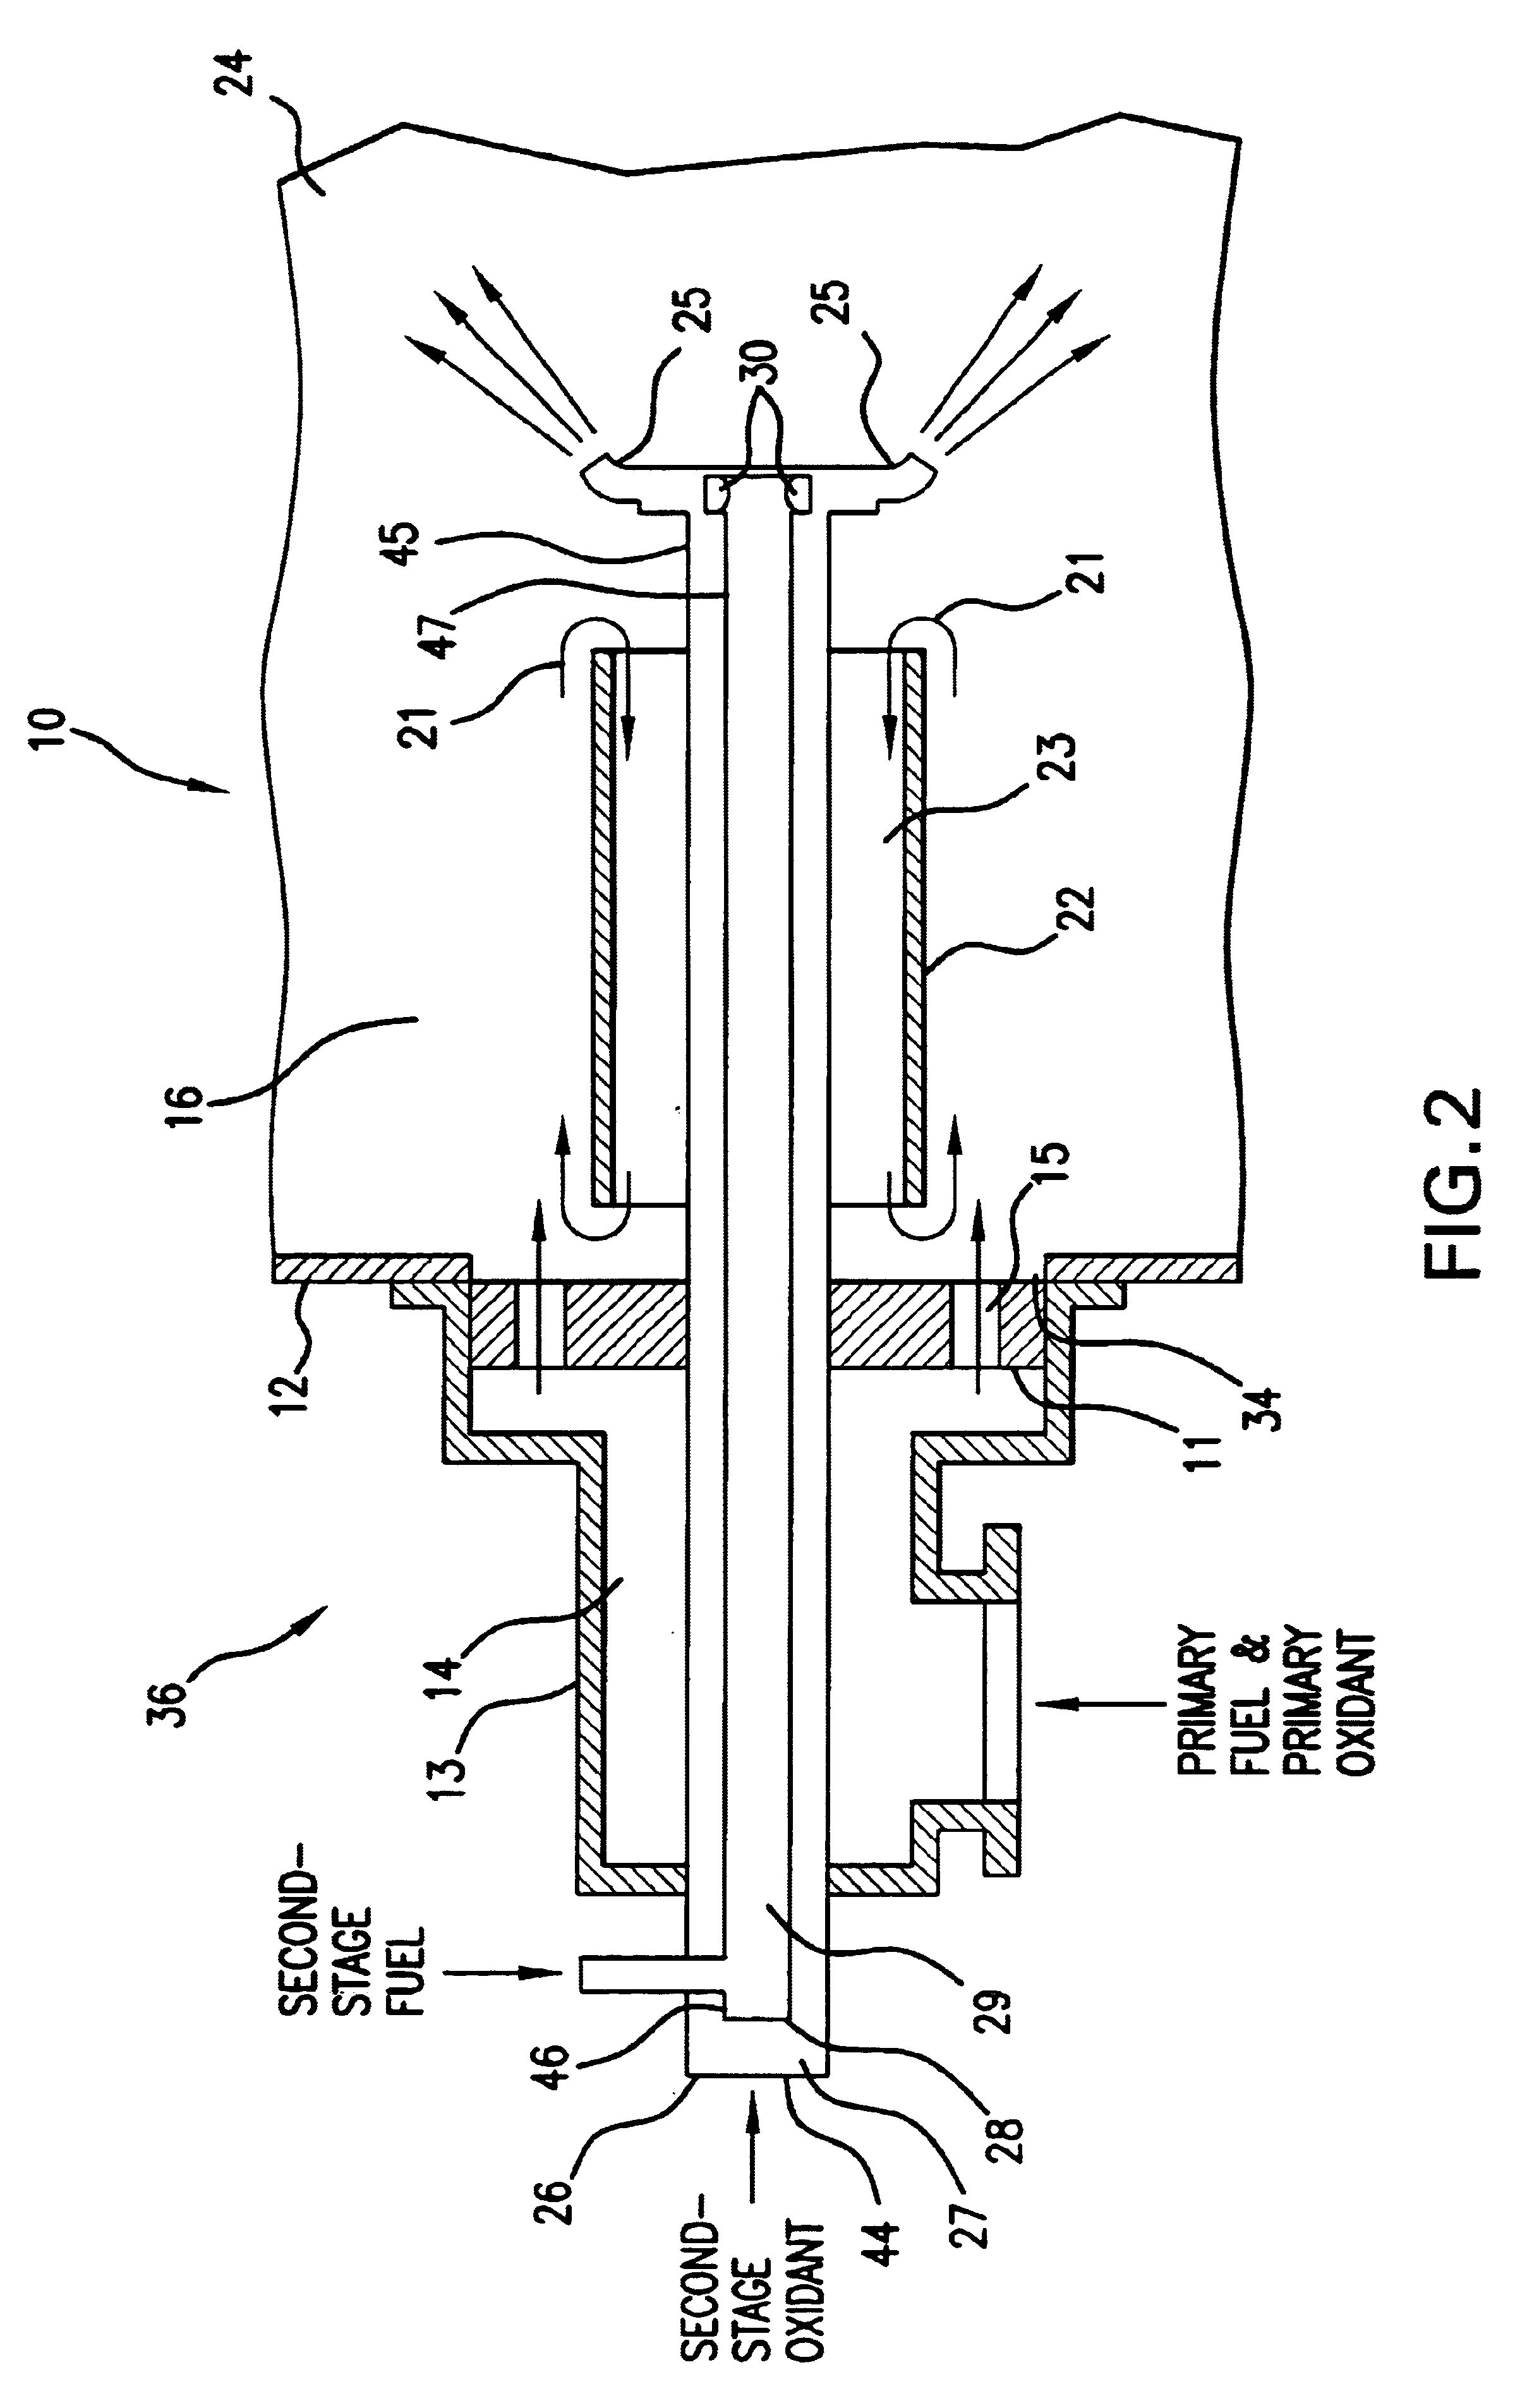 Method and apparatus for advanced staged combustion utilizing forced internal recirculation